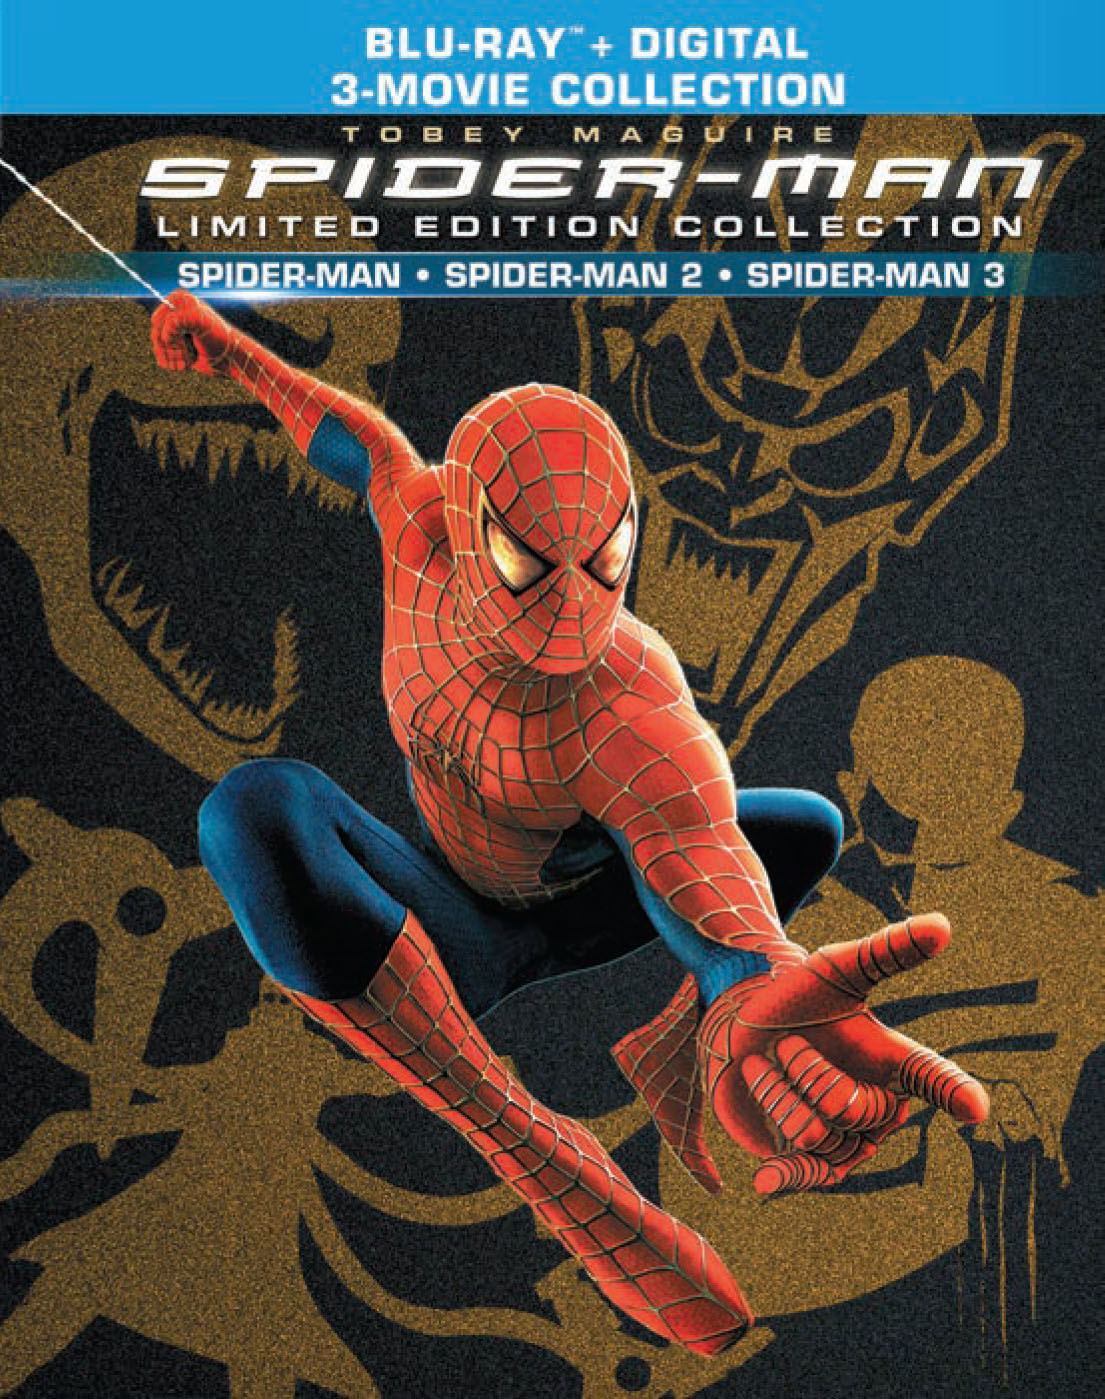 Spider-Man Trilogy Limited Edition Collection [Blu-ray] [2 Discs] - Best Buy